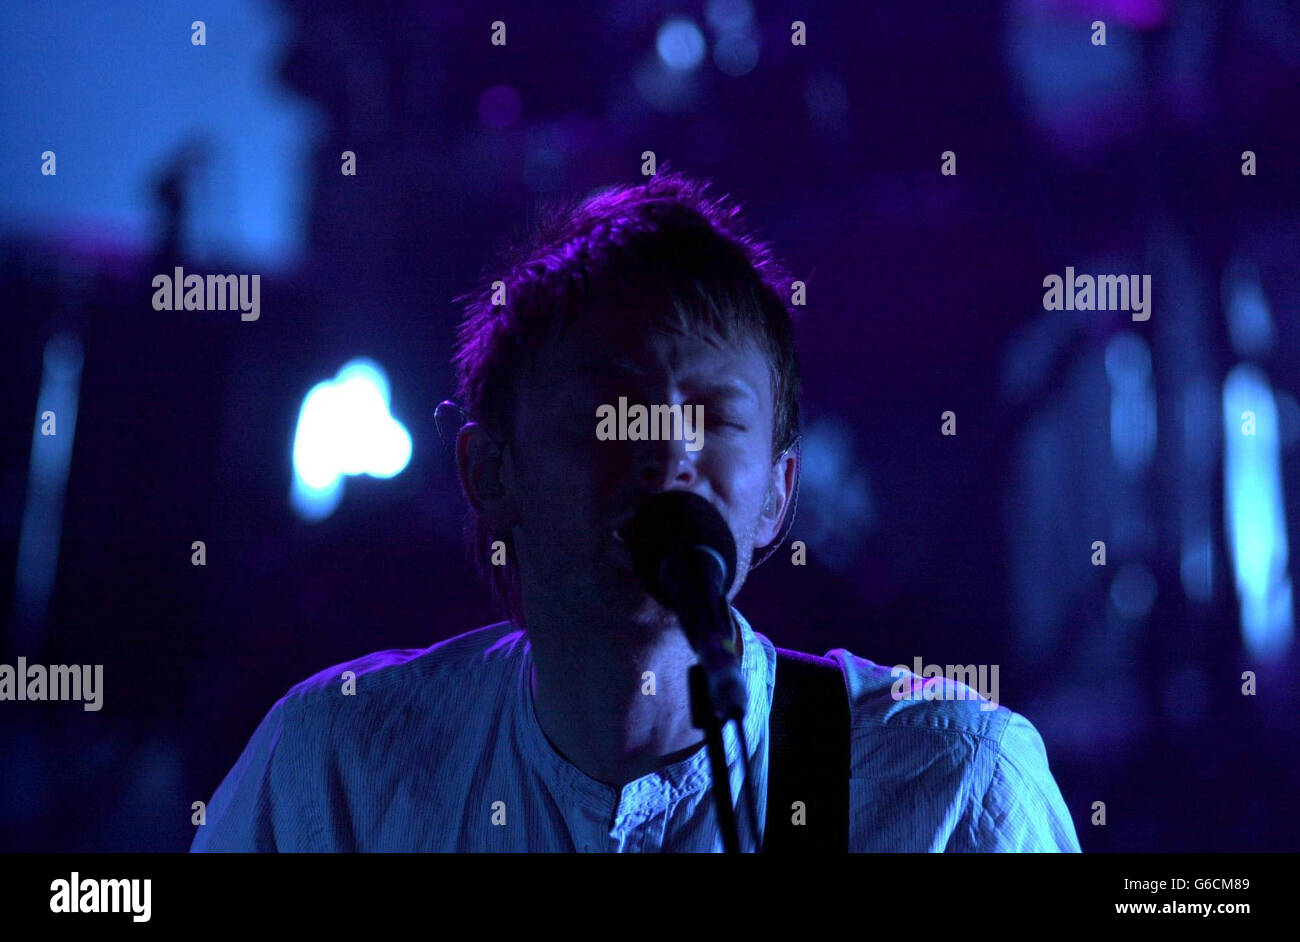 Radiohead concert - Dublin. Radiohead frontman, Thom Yorke, during the bands gig at the Olympia Theatre, Dublin, Republic of Ireland. Stock Photo